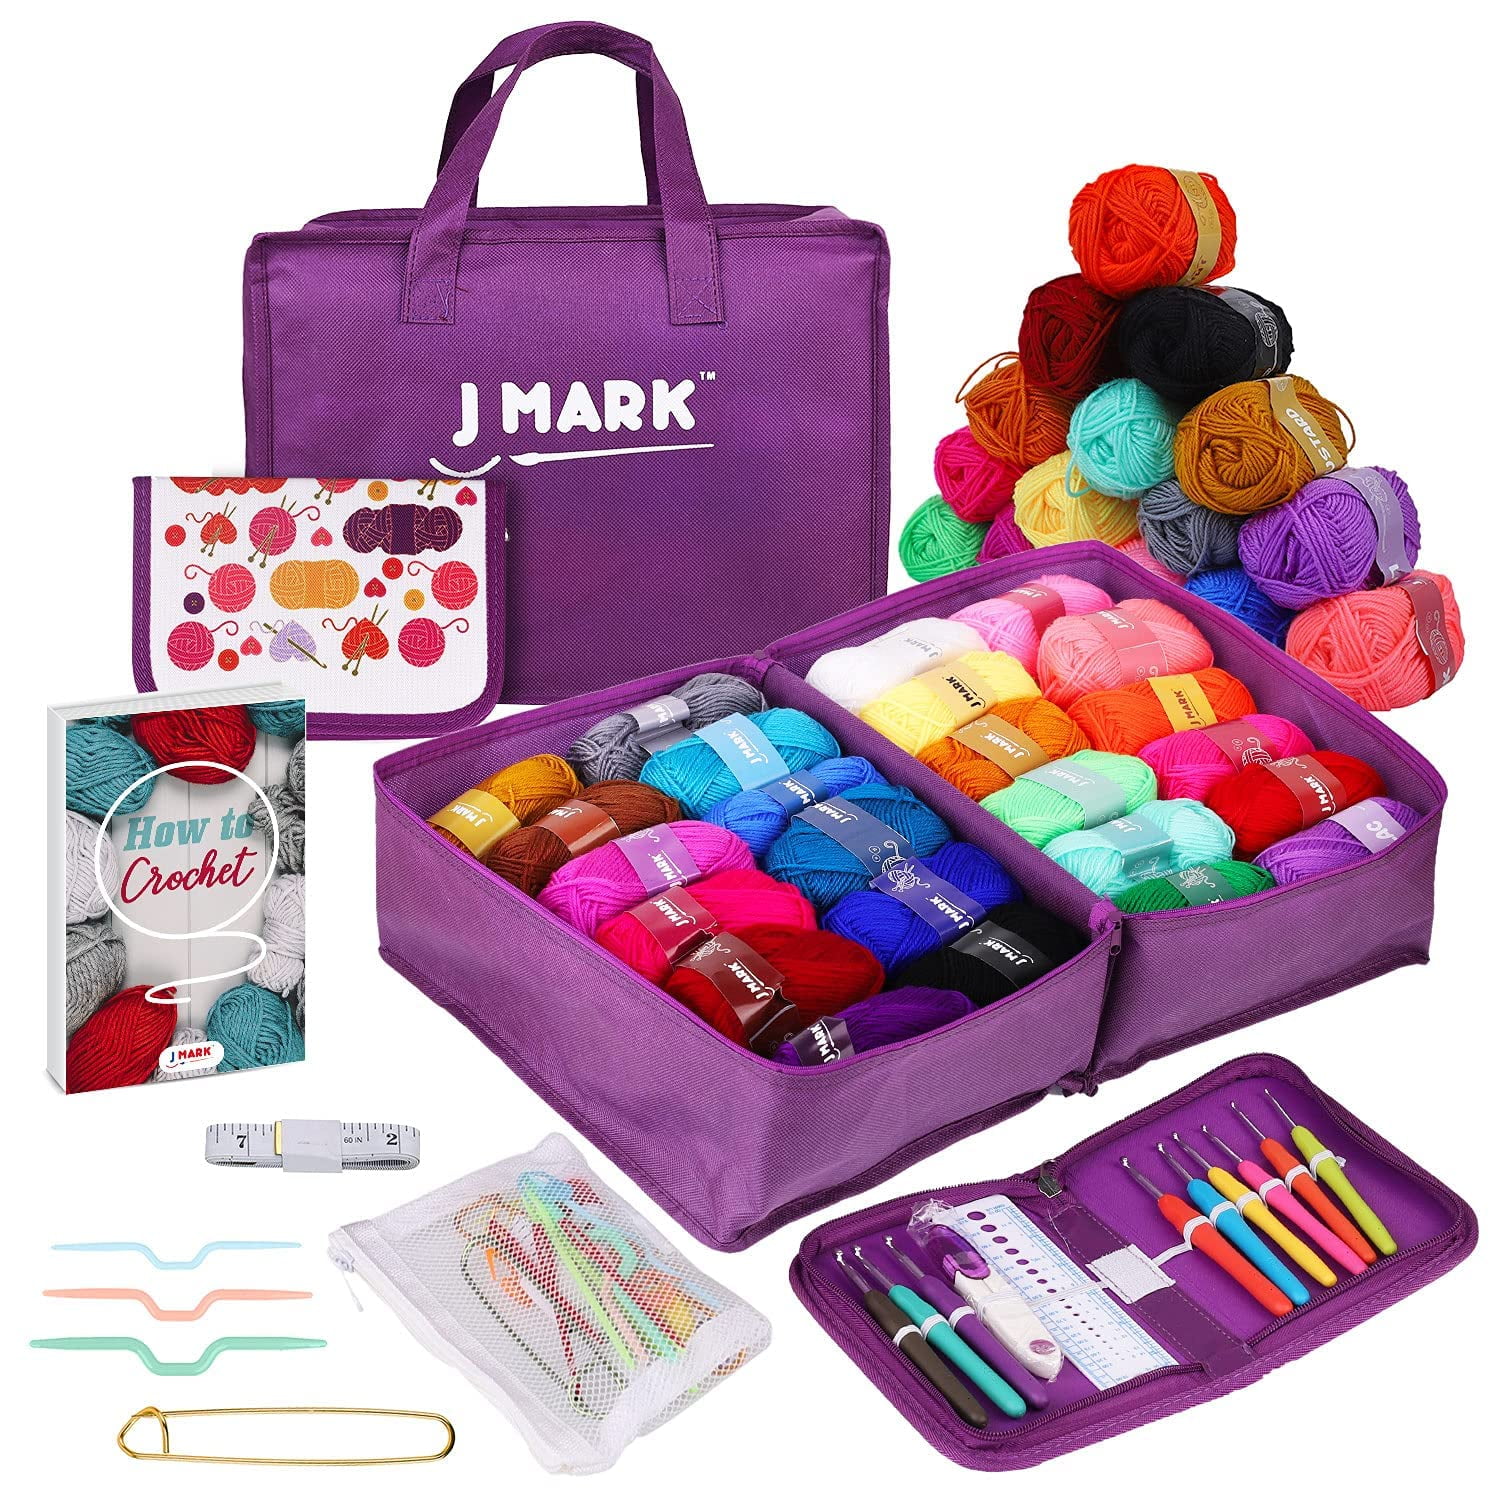 87 Piece Crochet Kit with Yarn Set Premium Bundle Includes 9 Crochet Hooks,  48 Acrylic Crochet Yarn Balls, 6 Needles, Book, Bags and More Beginner and  Professional Starter Pack Set 